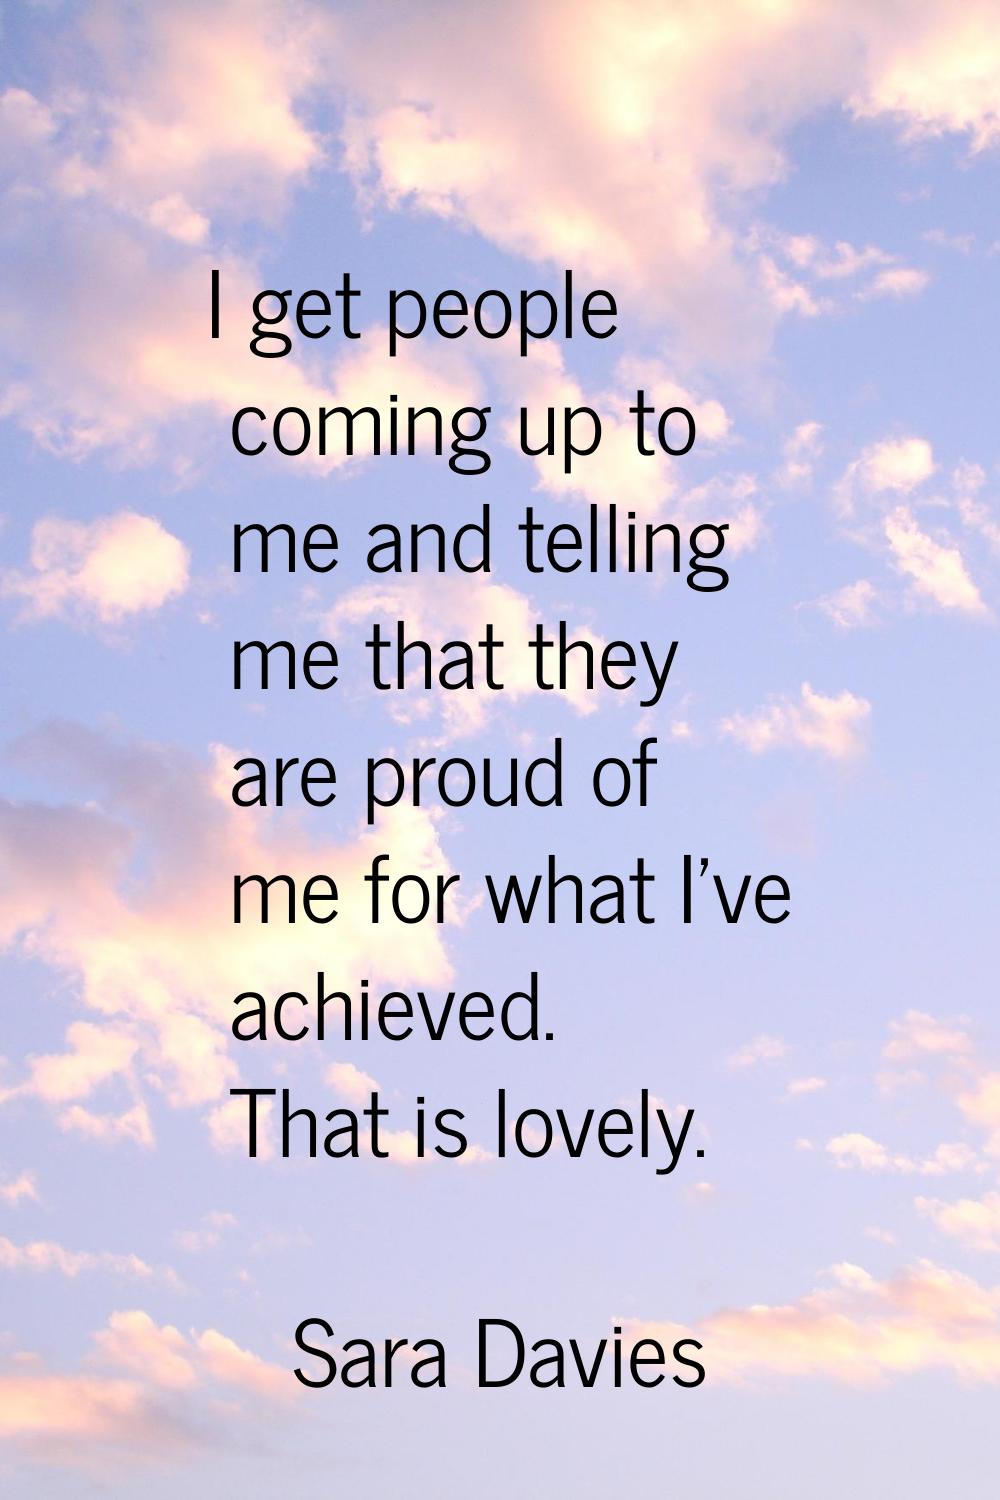 I get people coming up to me and telling me that they are proud of me for what I've achieved. That 